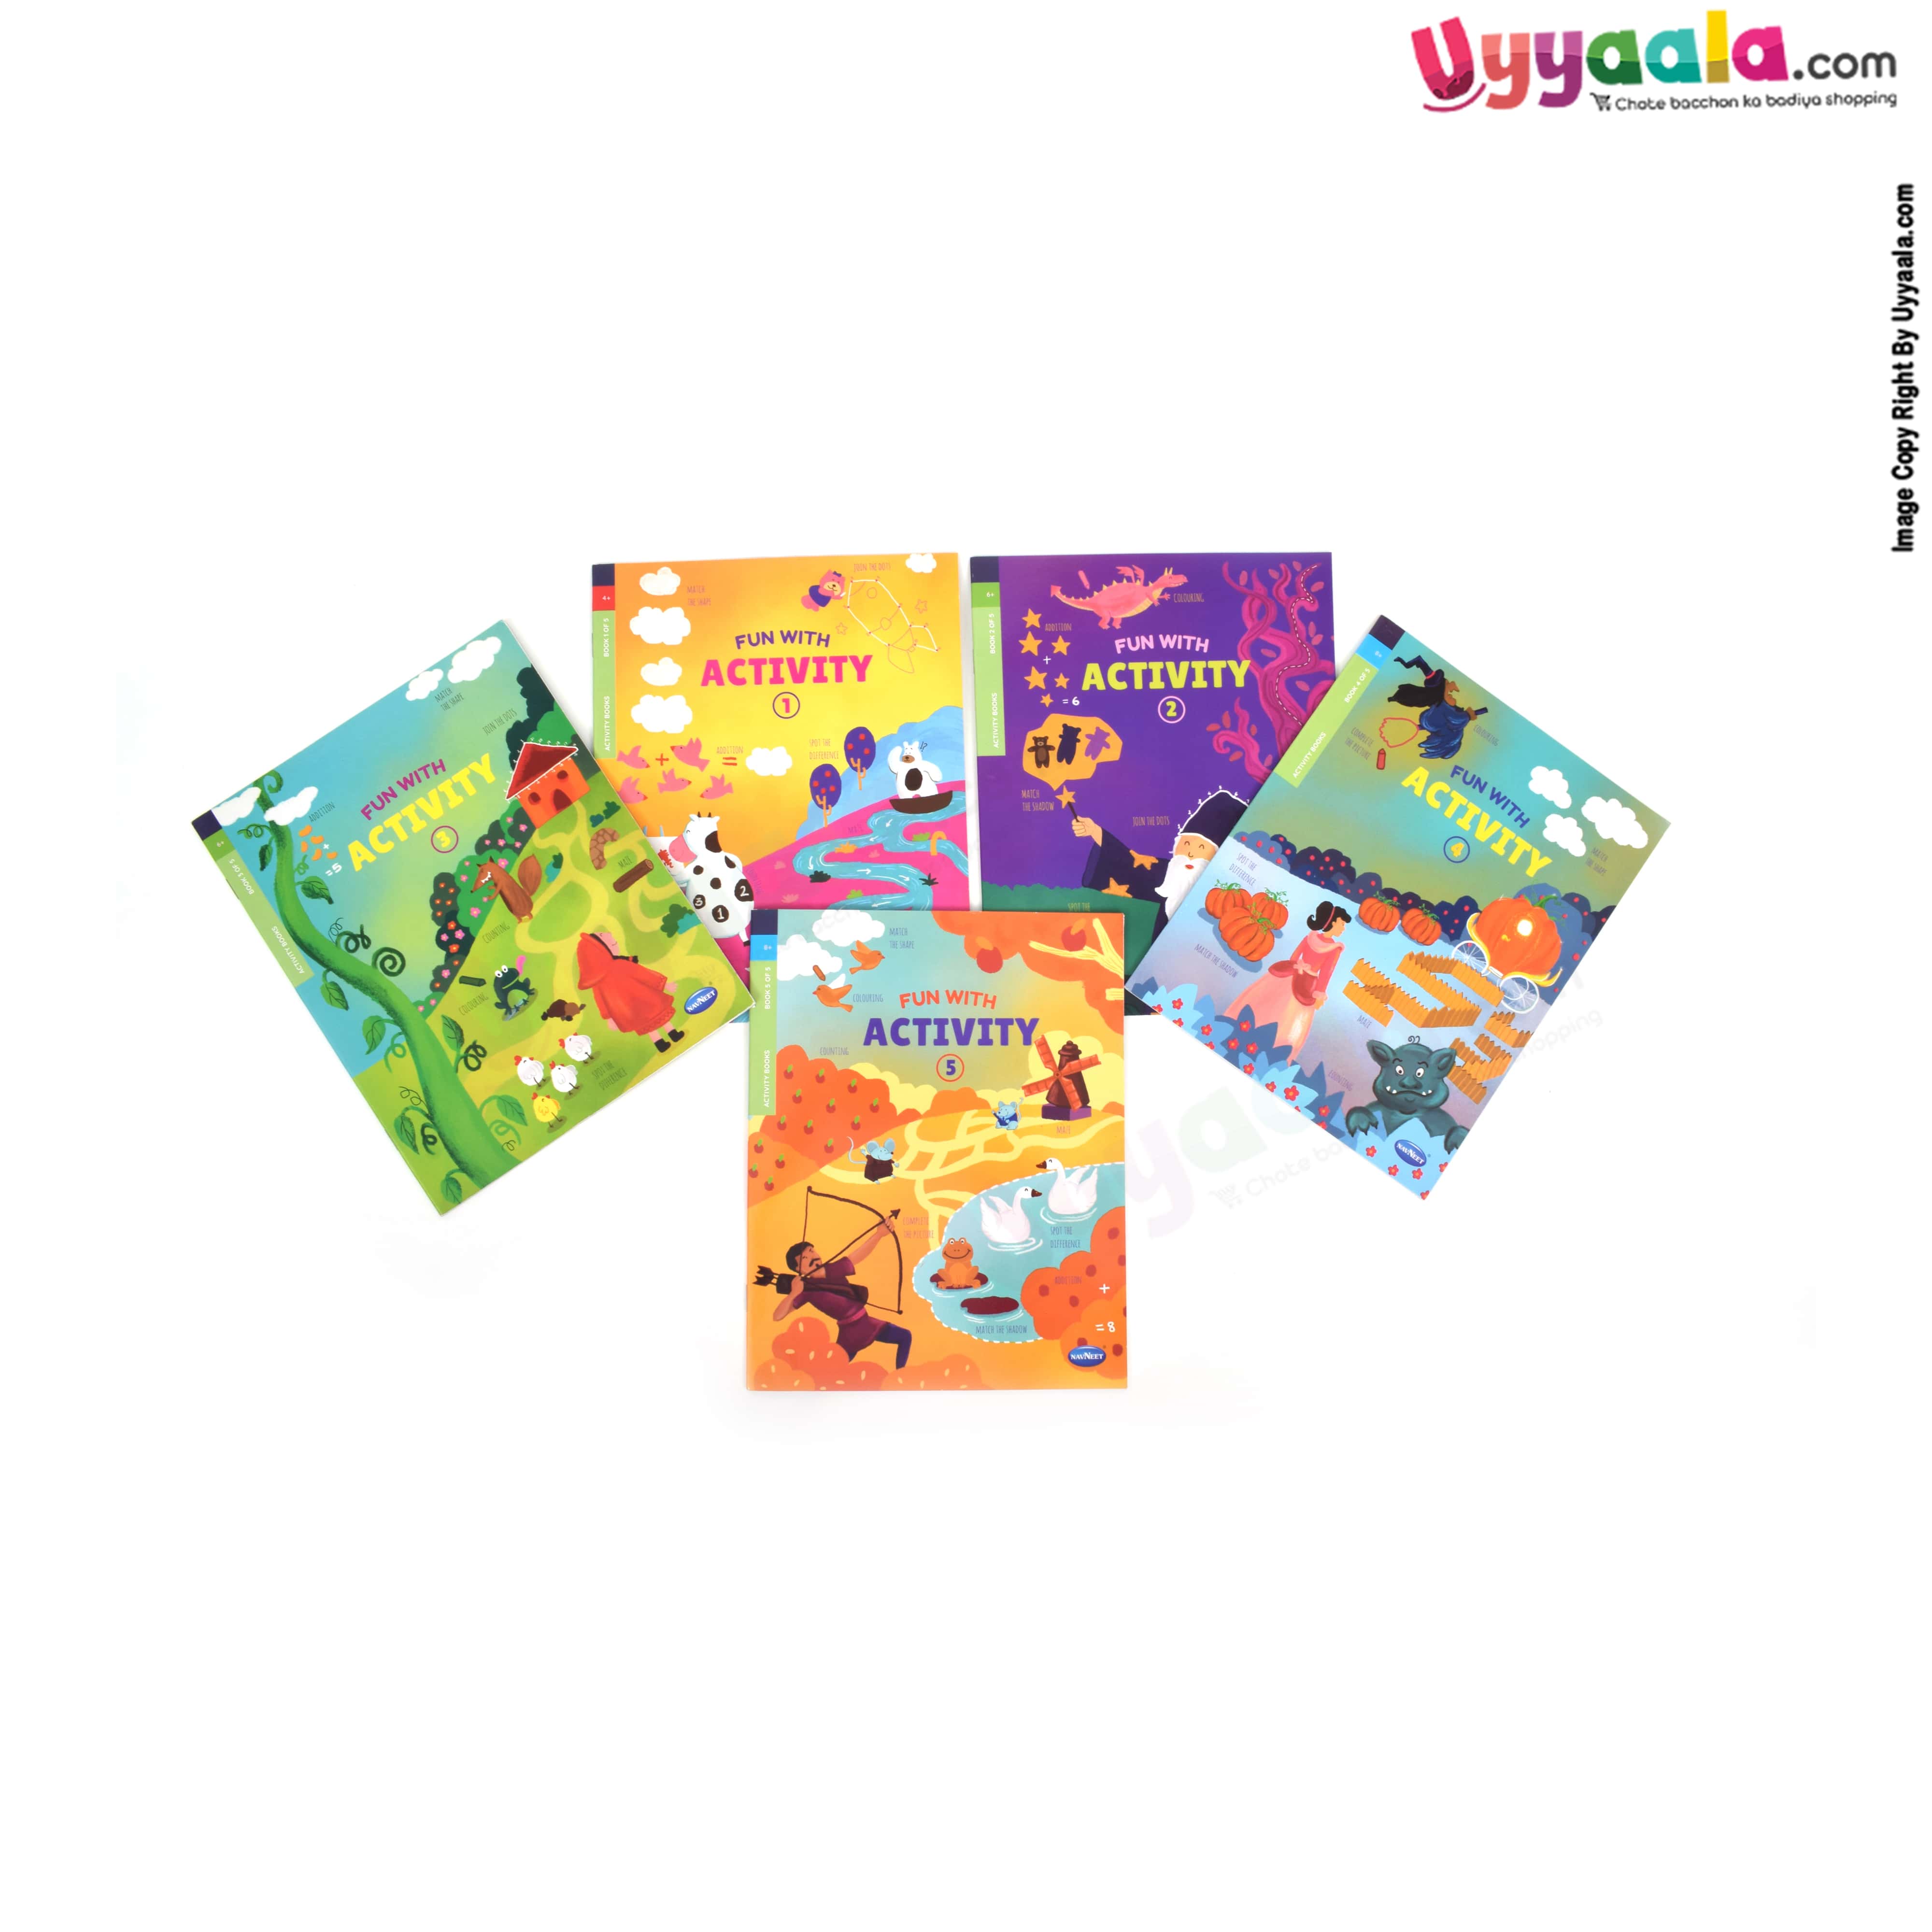 NAVNEET fun with activity book pack of 5 - 5 volumes